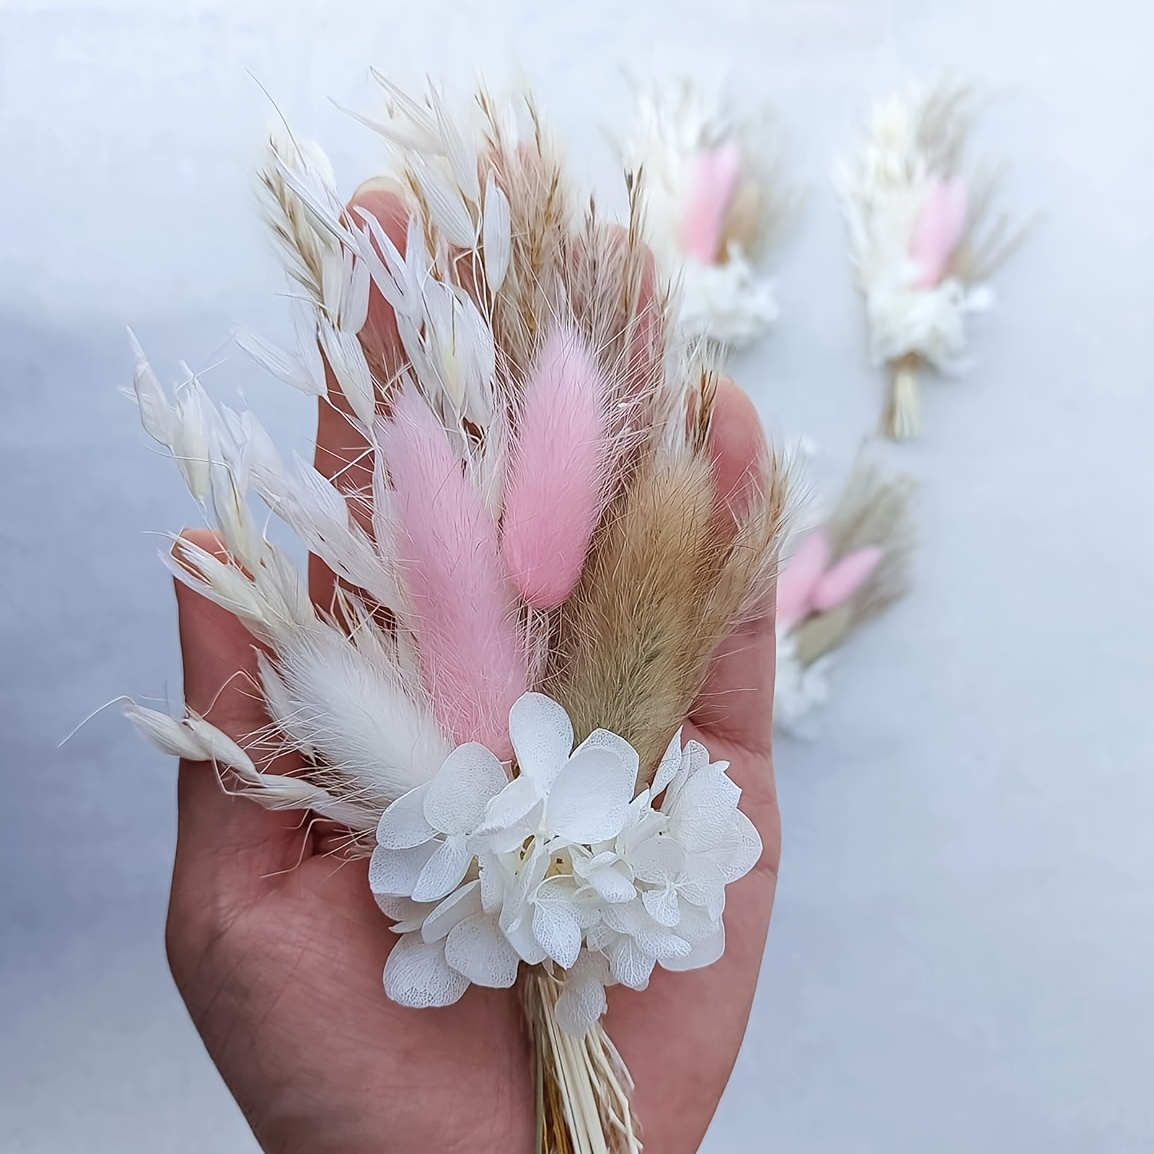 

Bohemian Wedding Decor - Artificial Flower Bouquets: Diy Home Centerpieces, Birthday Cake Table Decoration, Christmas Thanksgiving New Year Spring Festival Gift Decor - Dried Flowers